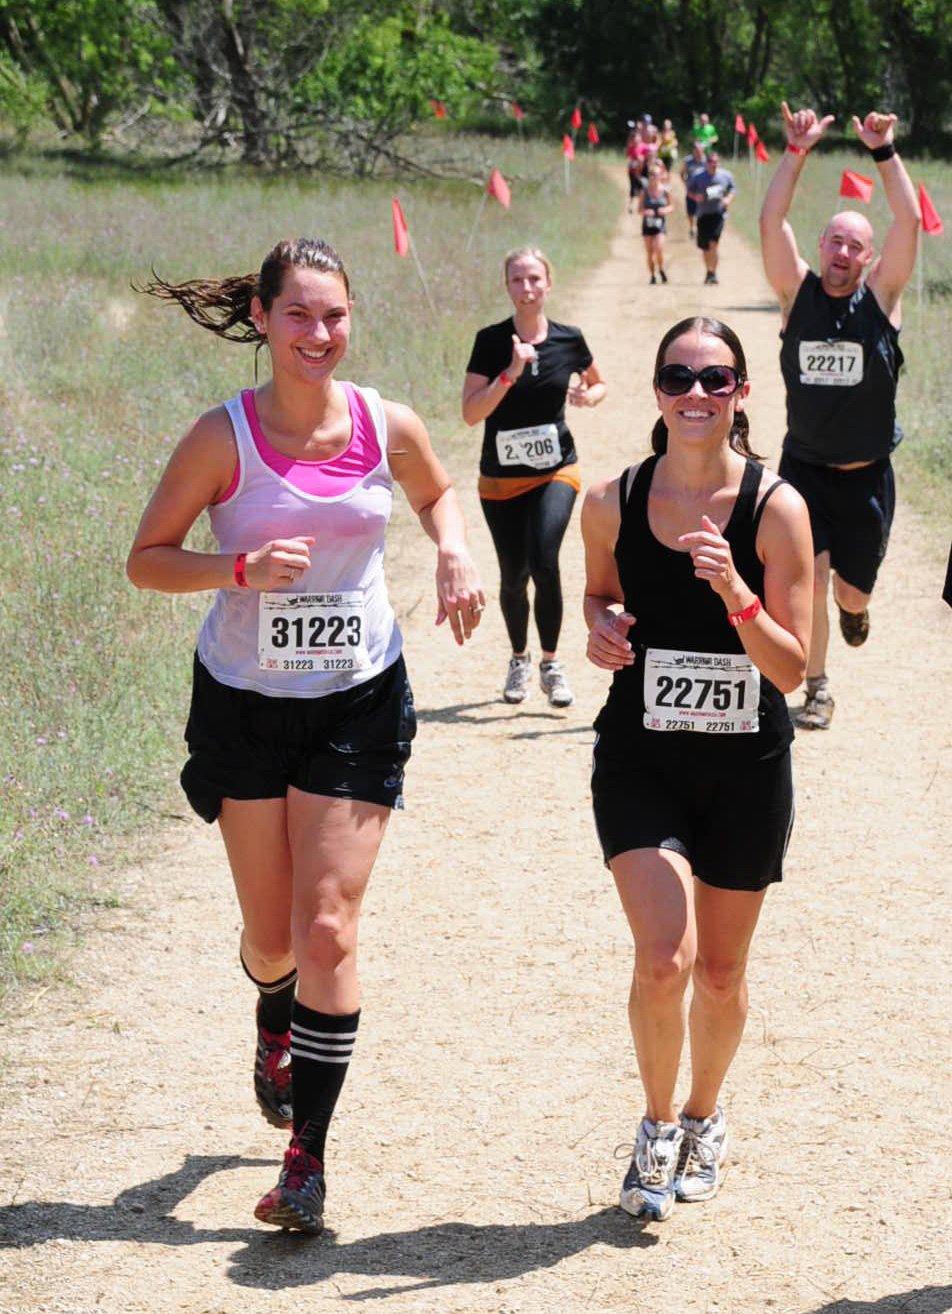 A group of runners participating in a mud run, smiling and showing enthusiasm as they compete. One runner in the foreground is wearing a white and pink tank top, black shorts, and knee-high athletic socks with distinctive black and white stripes, paired with running shoes.